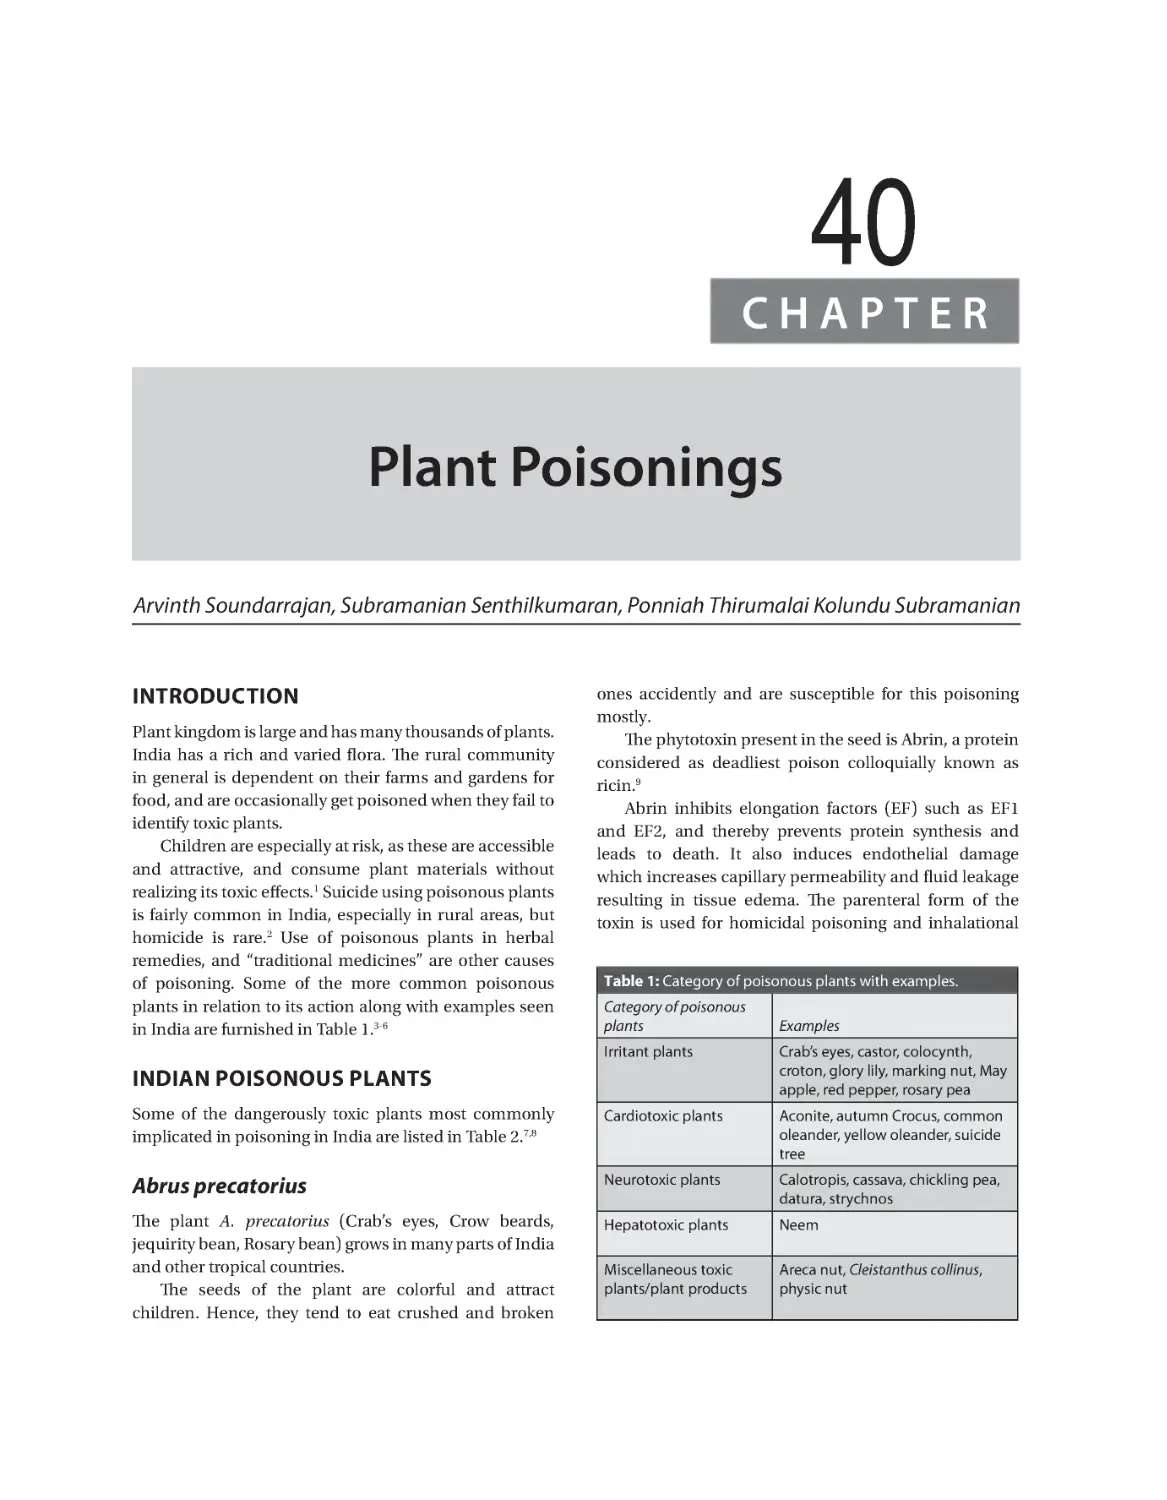 Chapter 40: Plant Poisonings